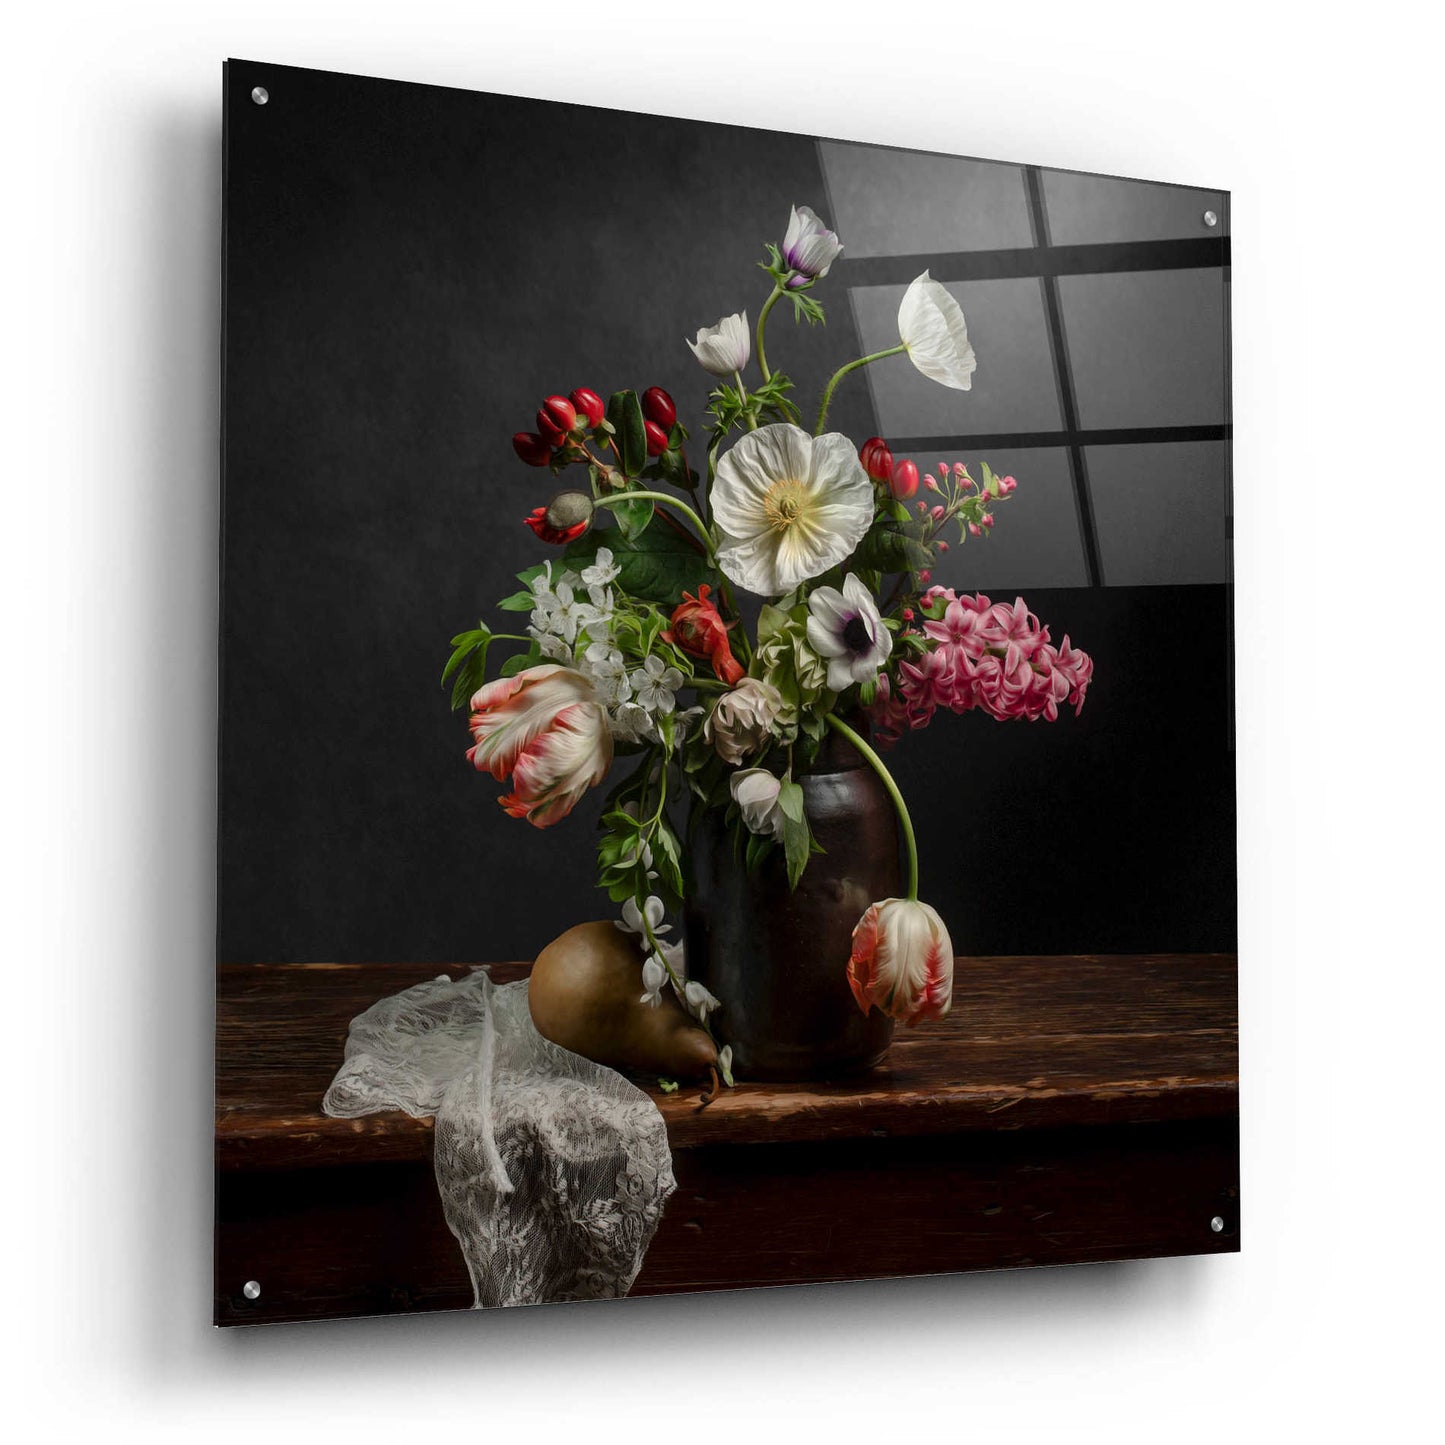 Epic Art 'Pear And Parrot Tulip Still Life' by Leah McLean Acrylic Glass Wall Art,36x36